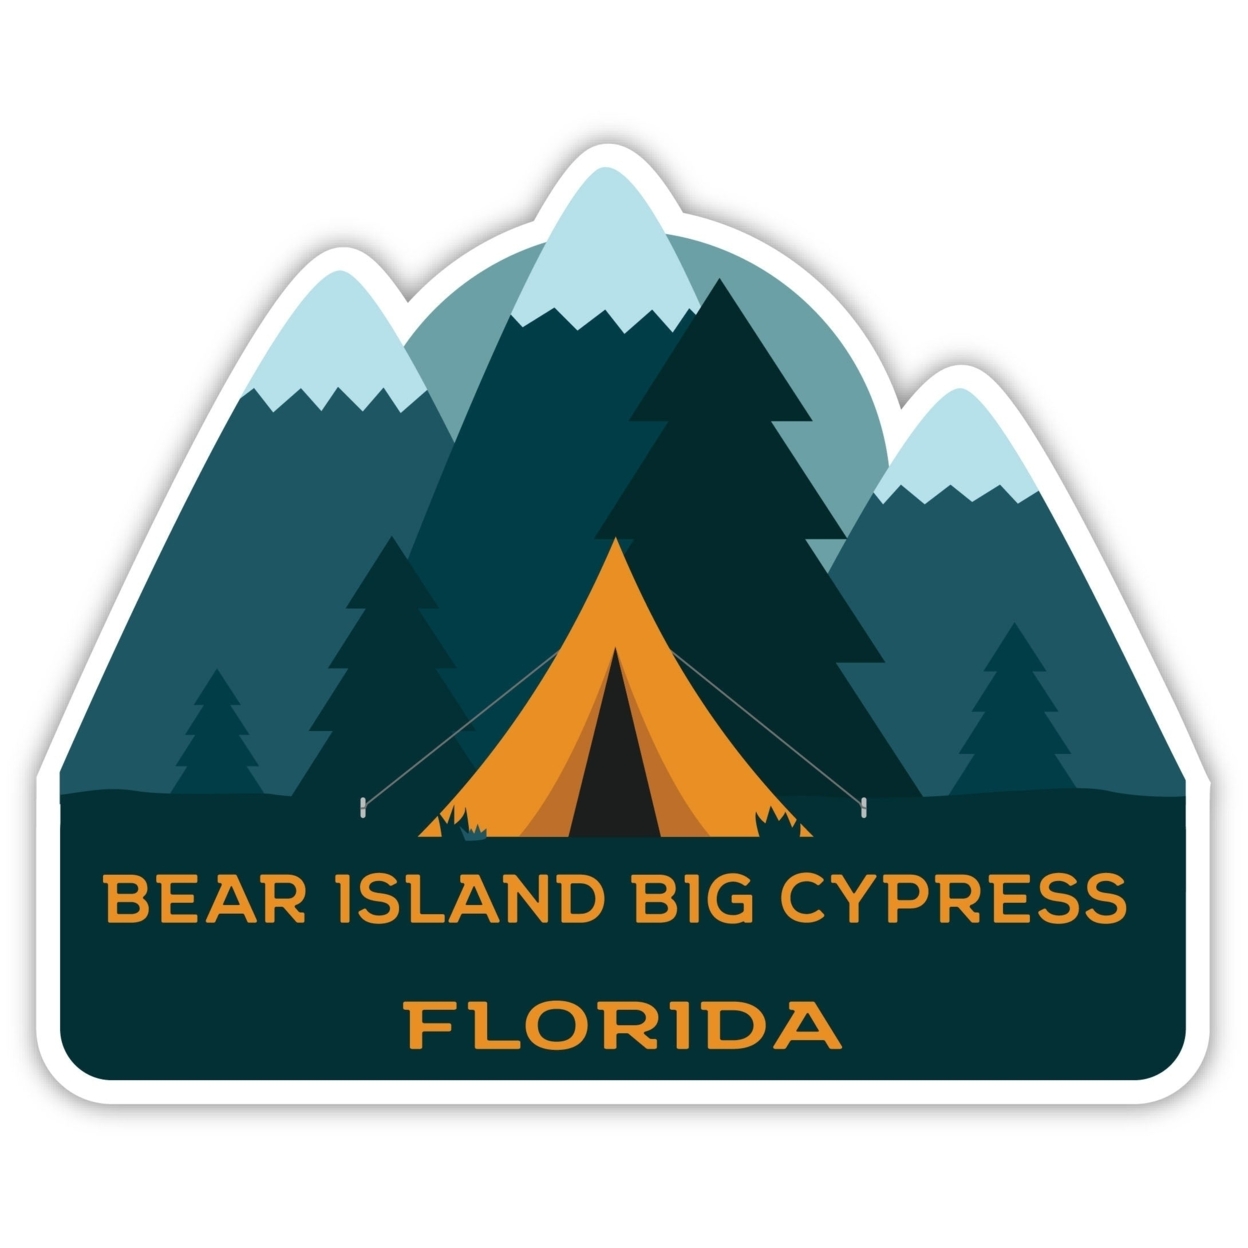 Bear Island Big Cypress Florida Souvenir Decorative Stickers (Choose Theme And Size) - 4-Pack, 4-Inch, Tent